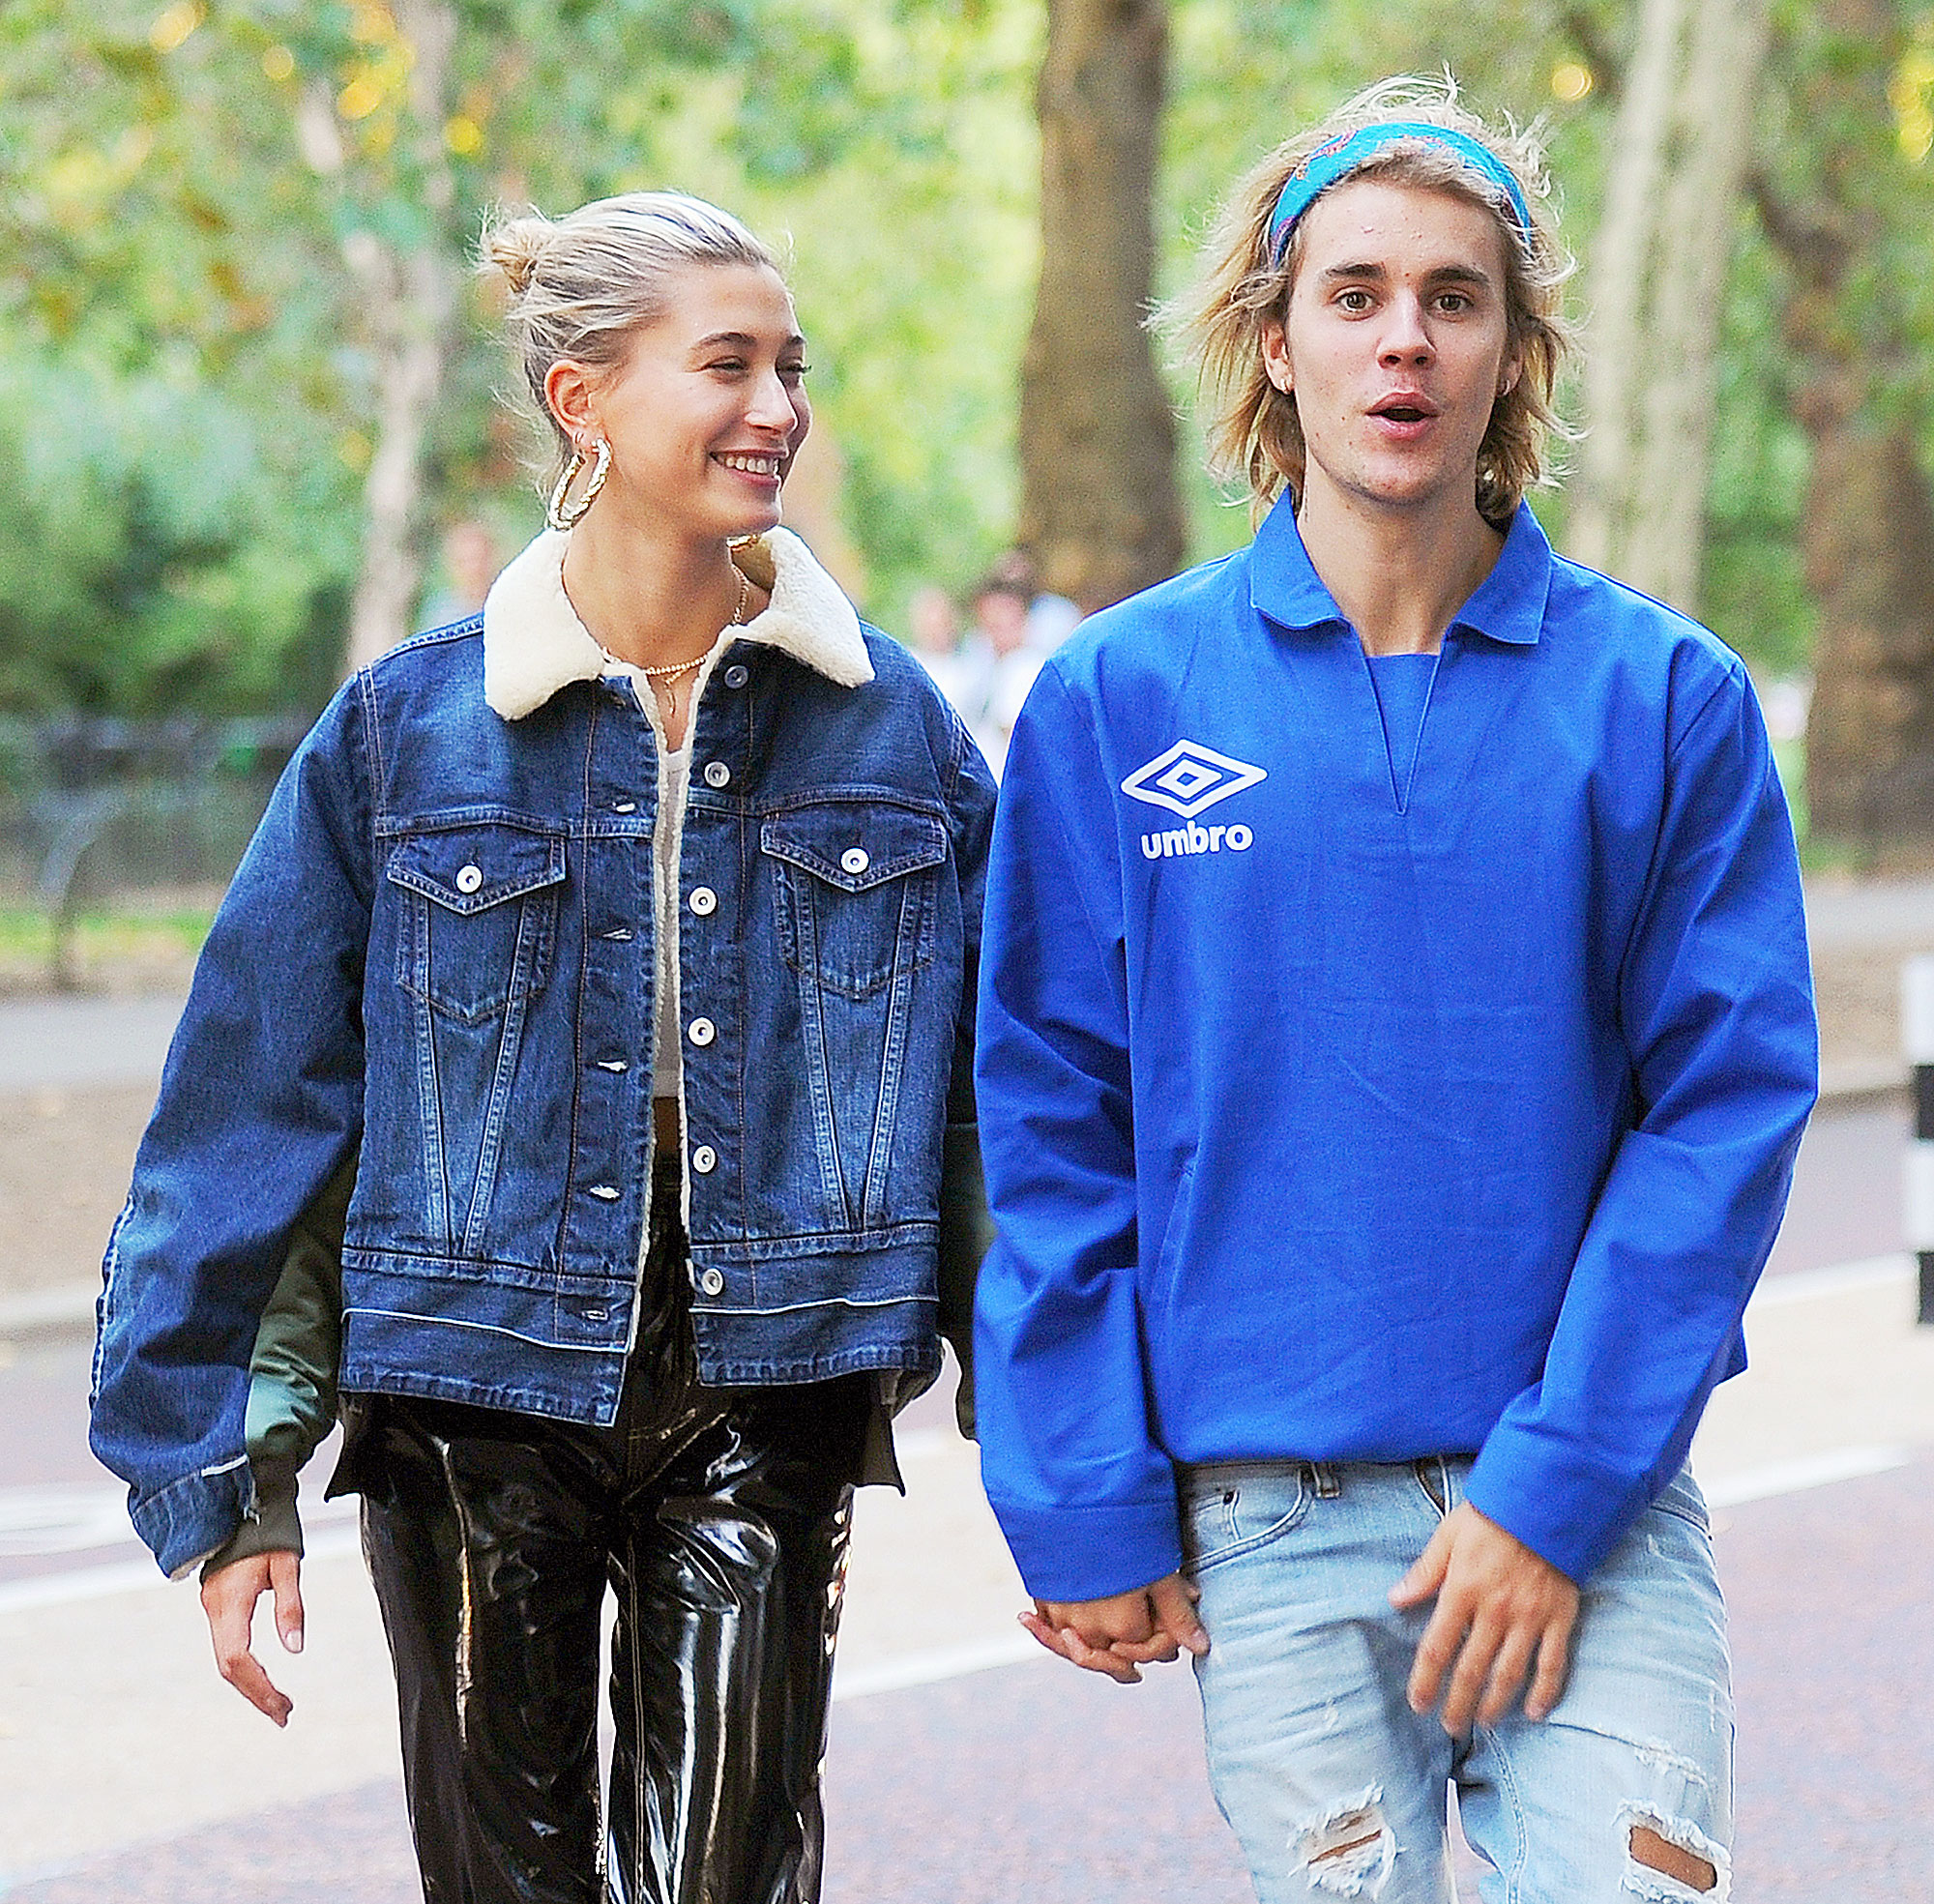 Hailey Baldwin's Engagement Anniversary Instagram Is The Sweetest Tribute  To Justin Bieber